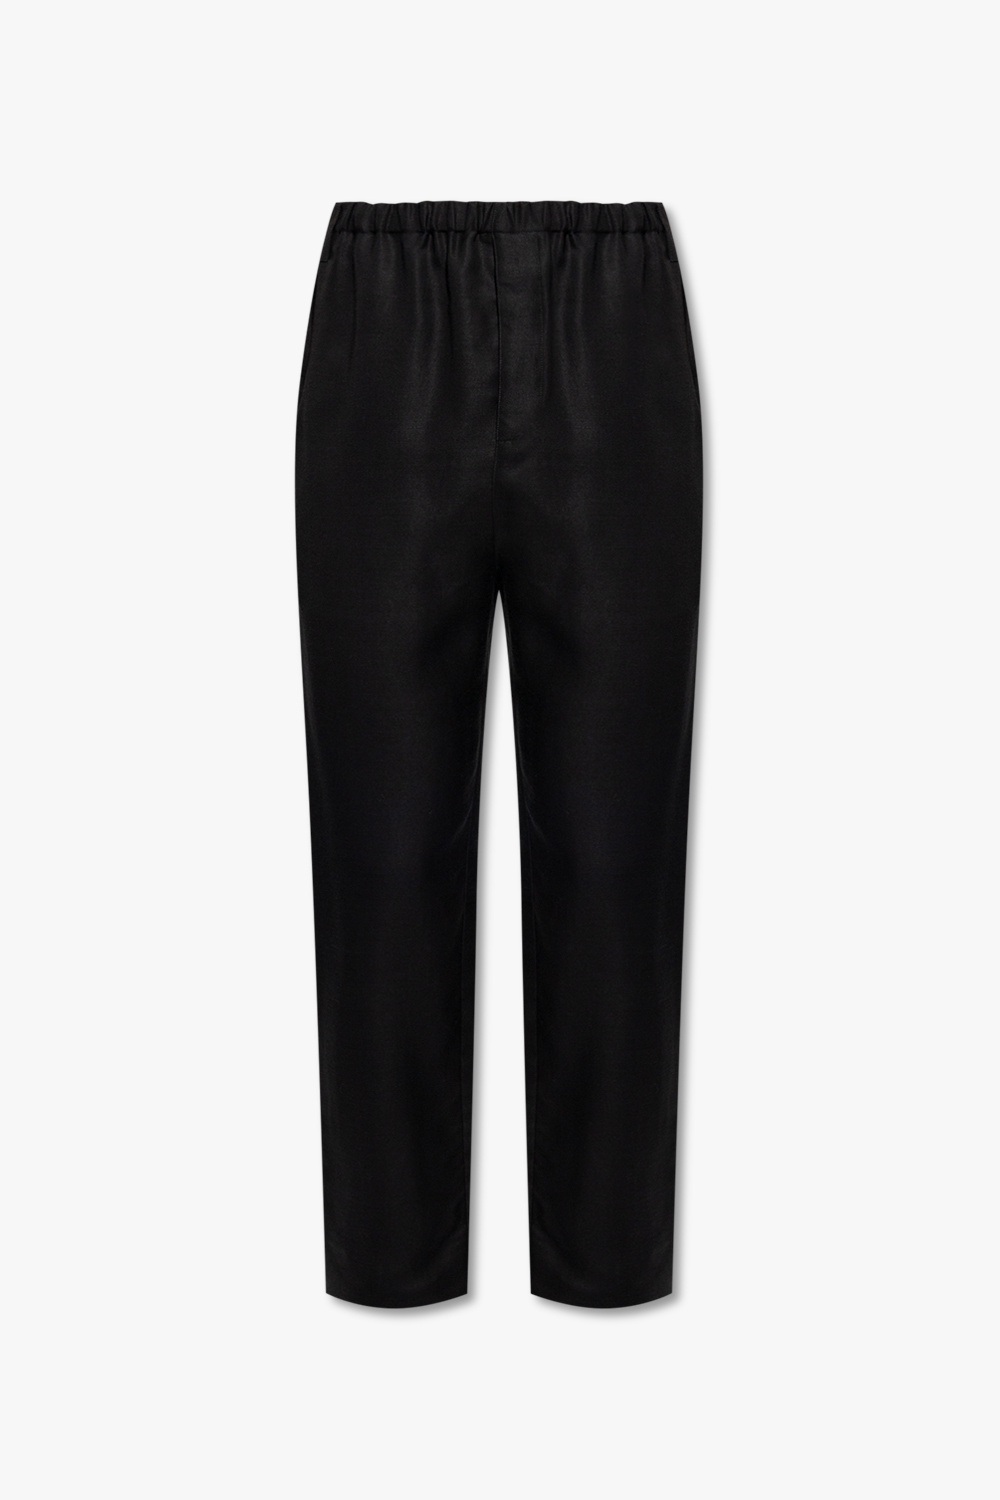 Saint Laurent Trousers with tapered legs